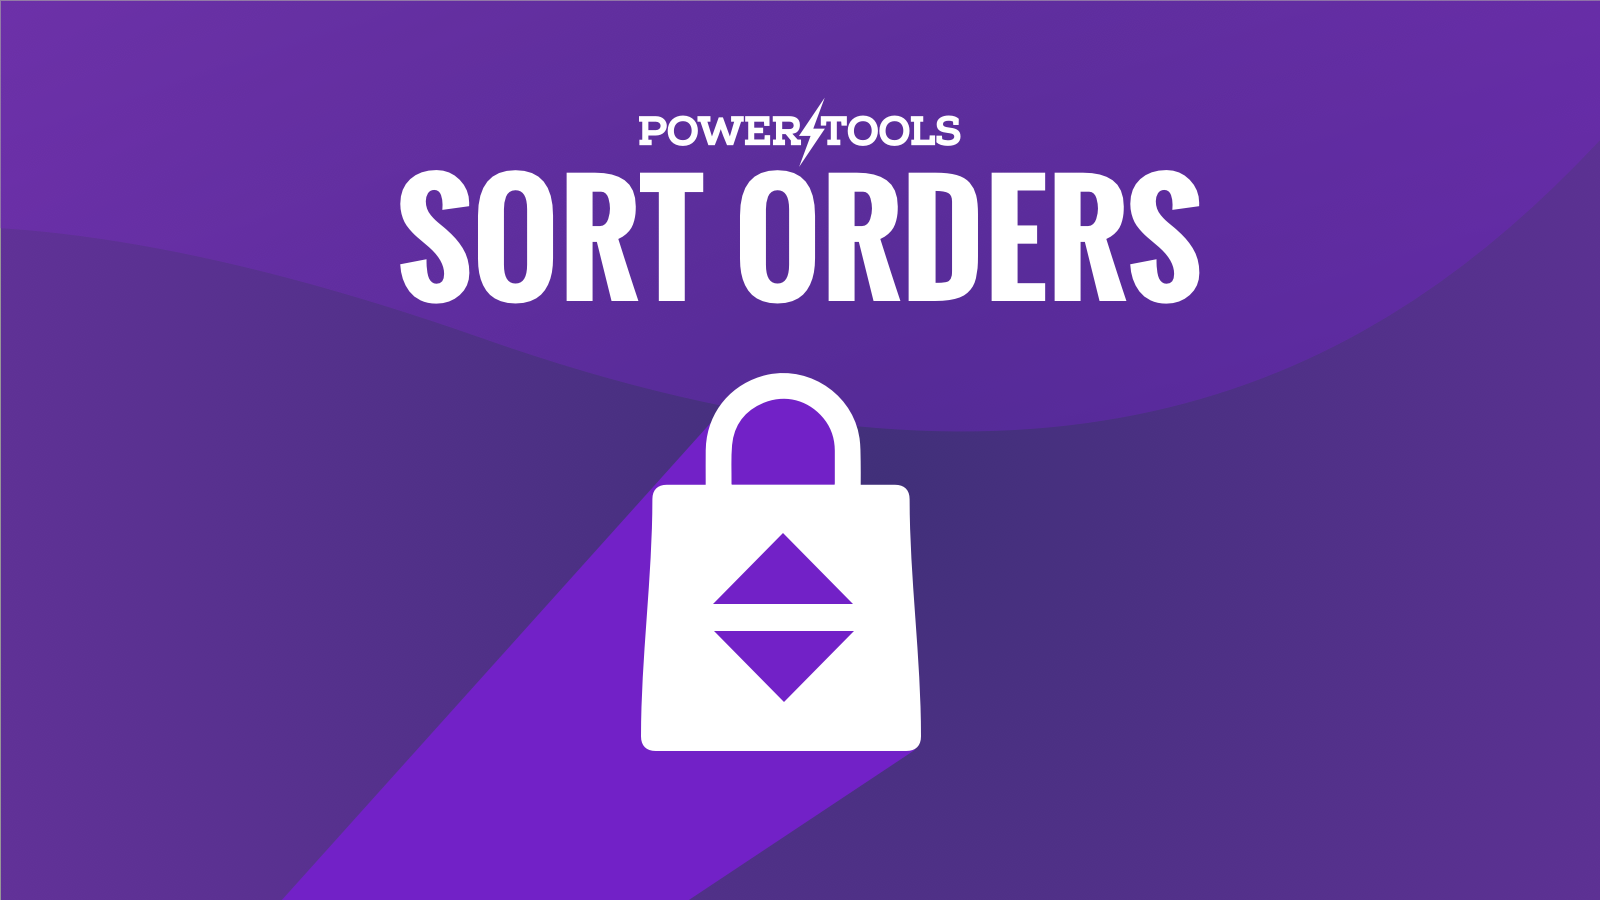 Take control of your collection sort orders and/or randomize!
